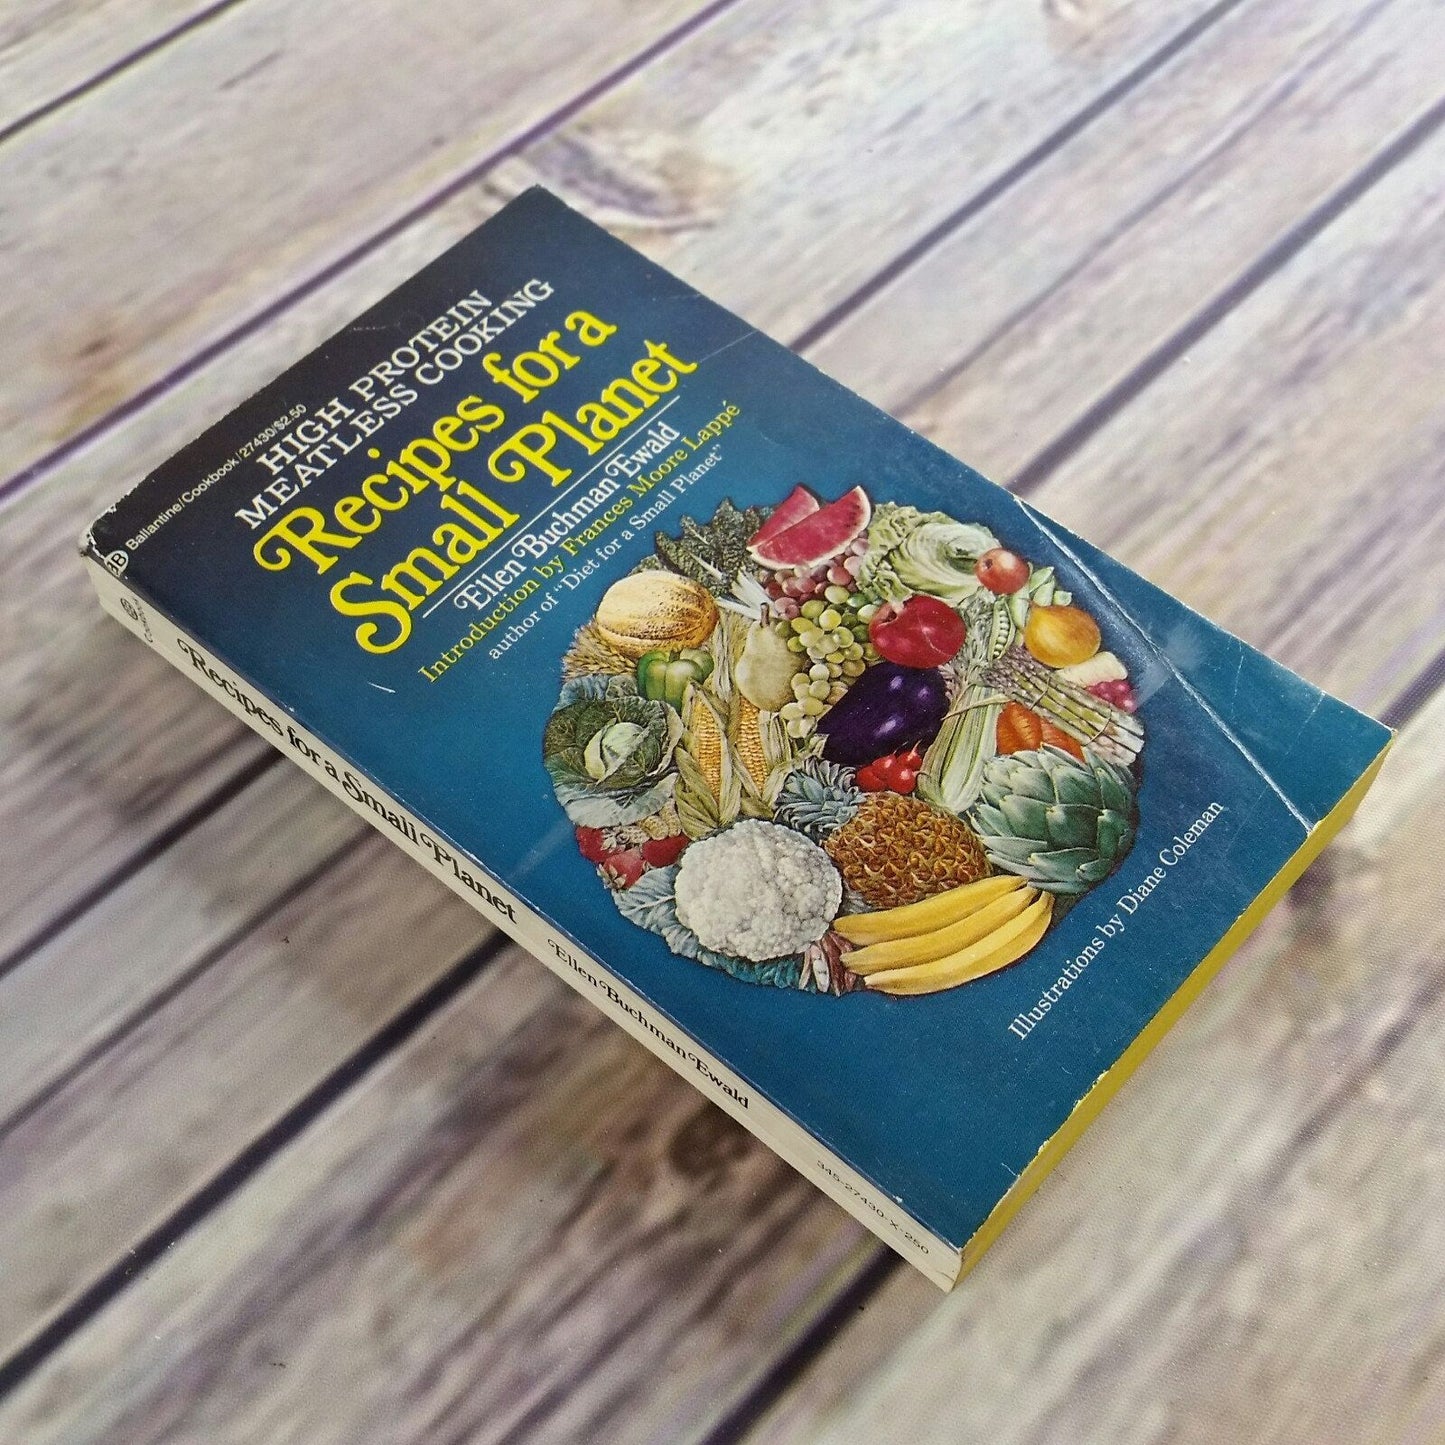 Vintage Cookbook Recipes for a Small Planet High Protein Meatless Cooking 1978 Vegetarian Paperback 22nd Printing